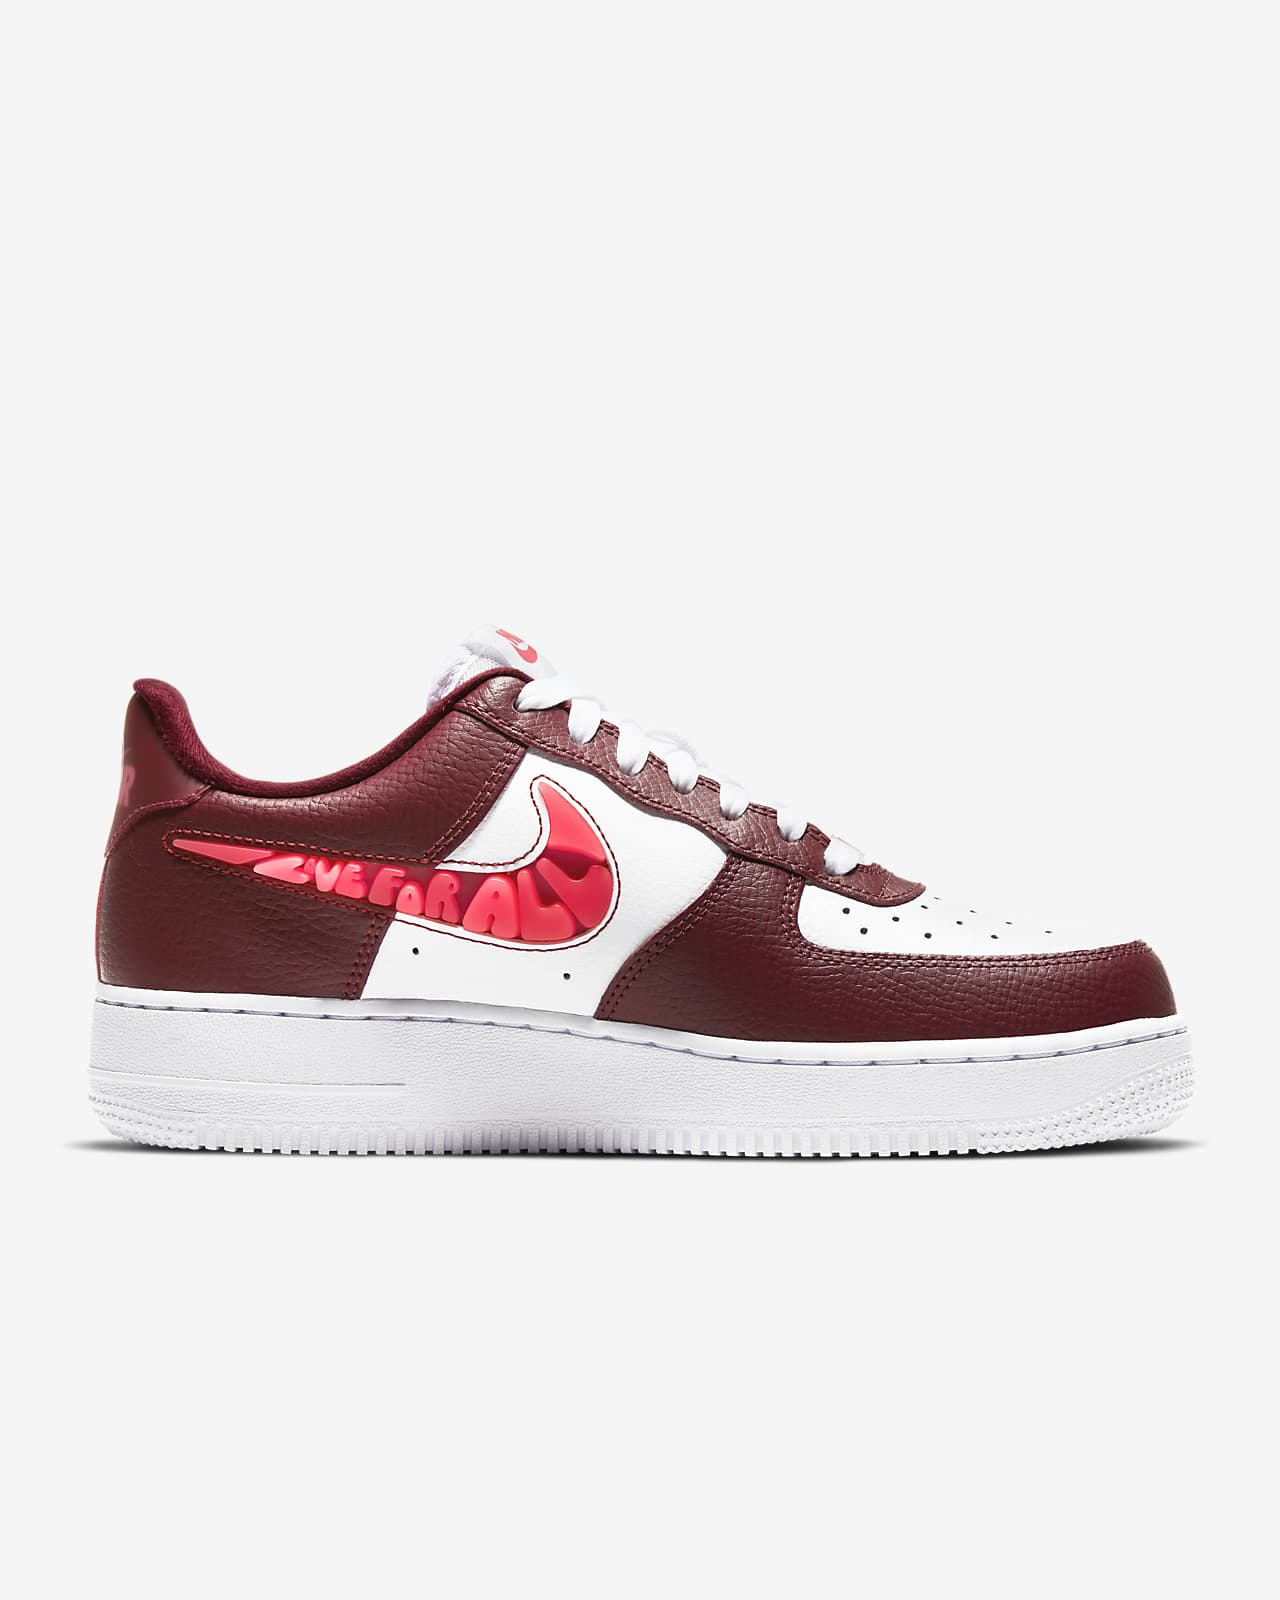 siren red air force 1